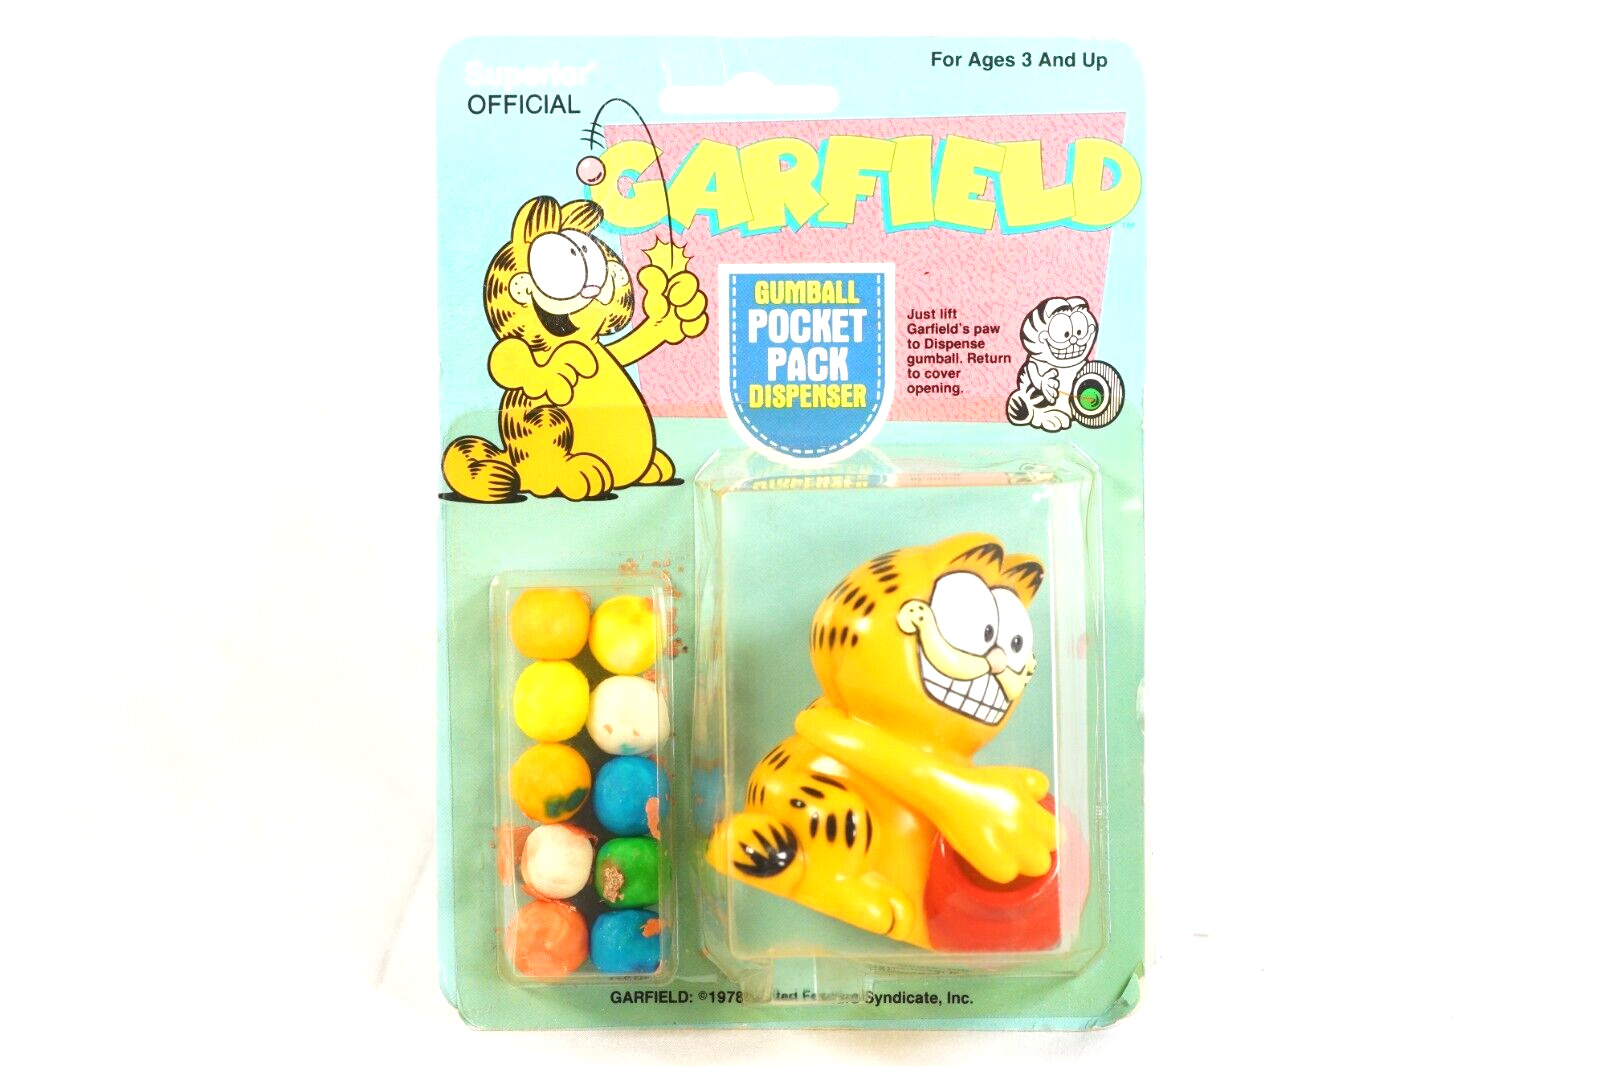 1988 Garfield Gumball Bank Pocket Dispenser Sealed Collectable Superior Toys